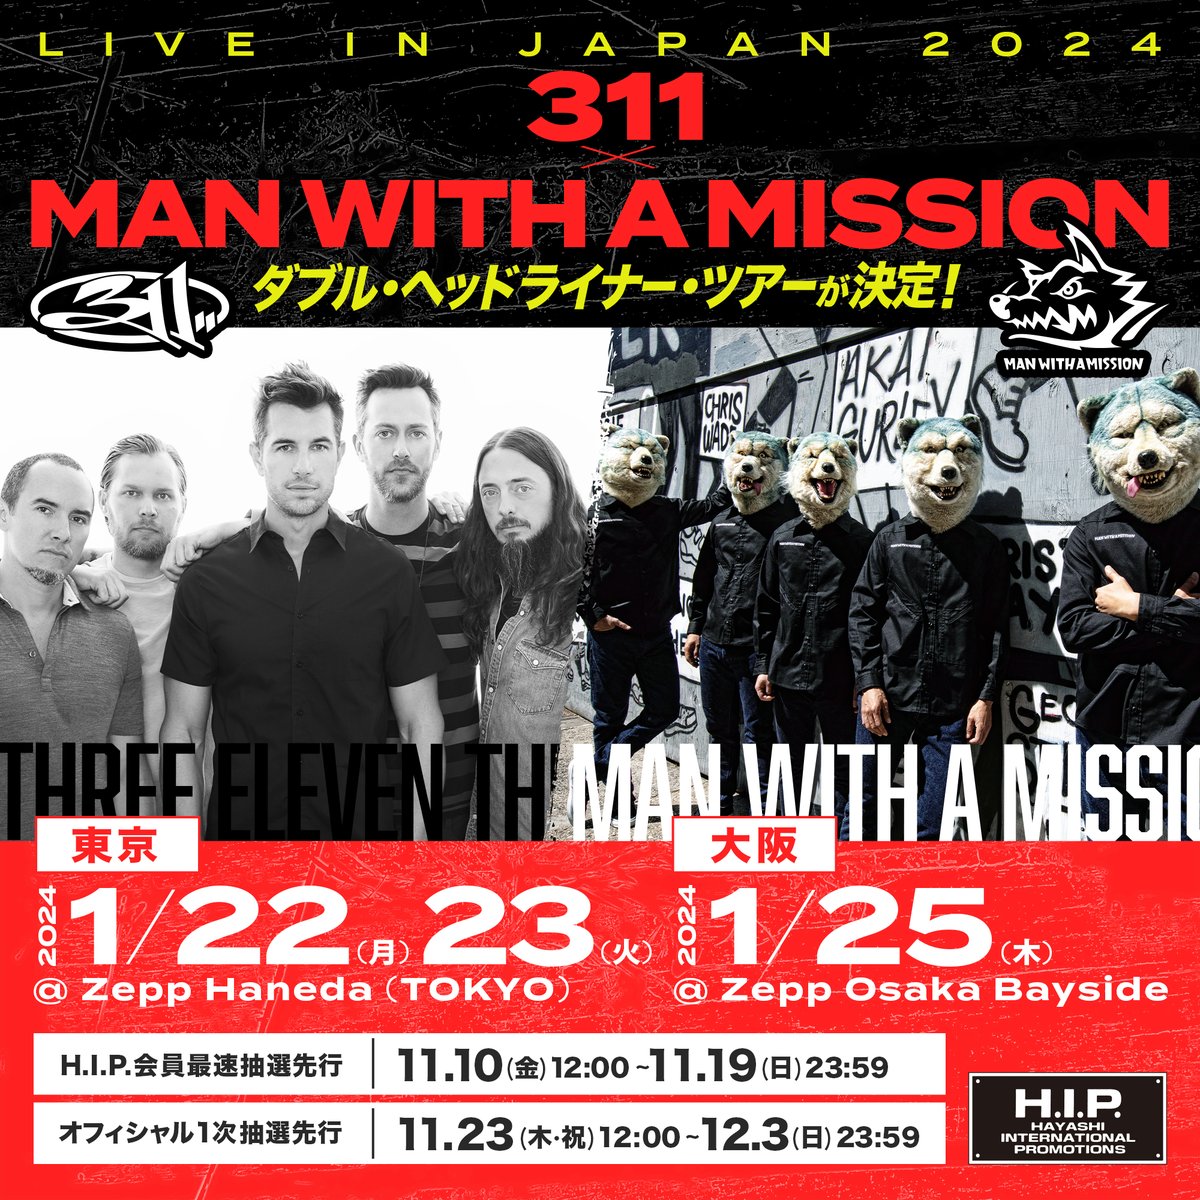 MAN WITH A MISSION on X: 